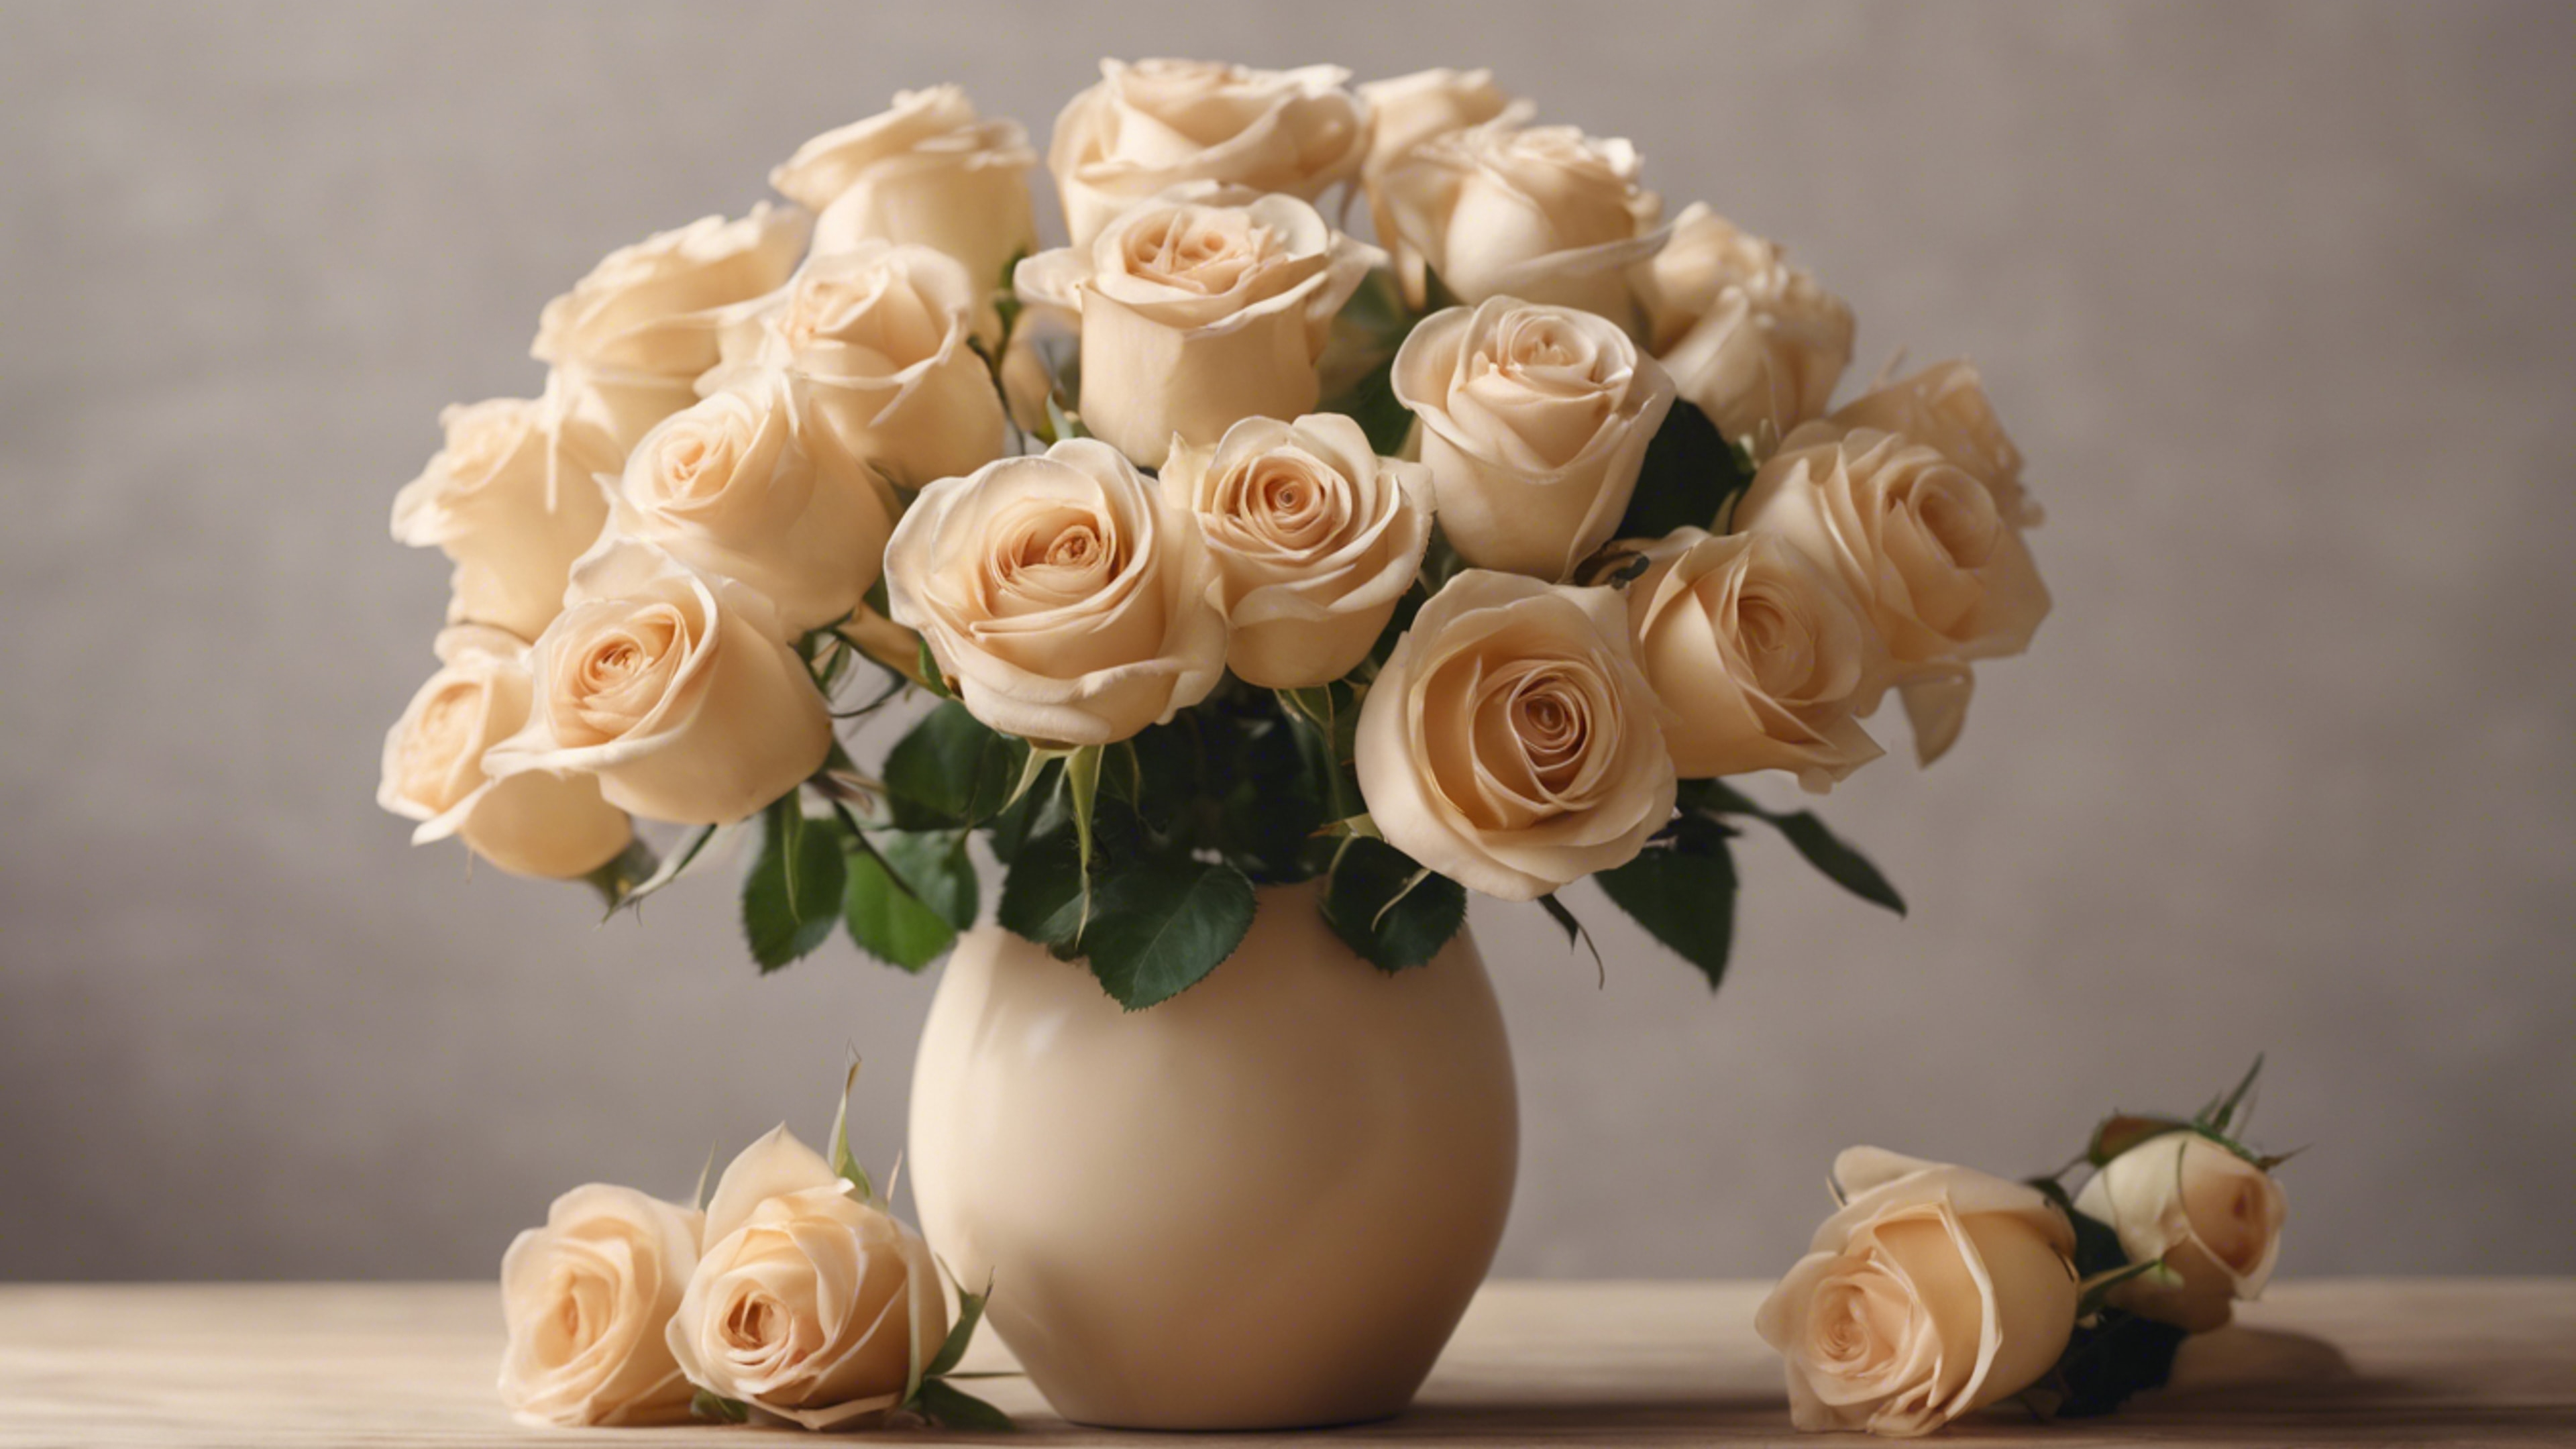 Still life of beige colored Roses arranged in a beige ceramic vase on a wooden table.壁紙[34157814654a454183f5]